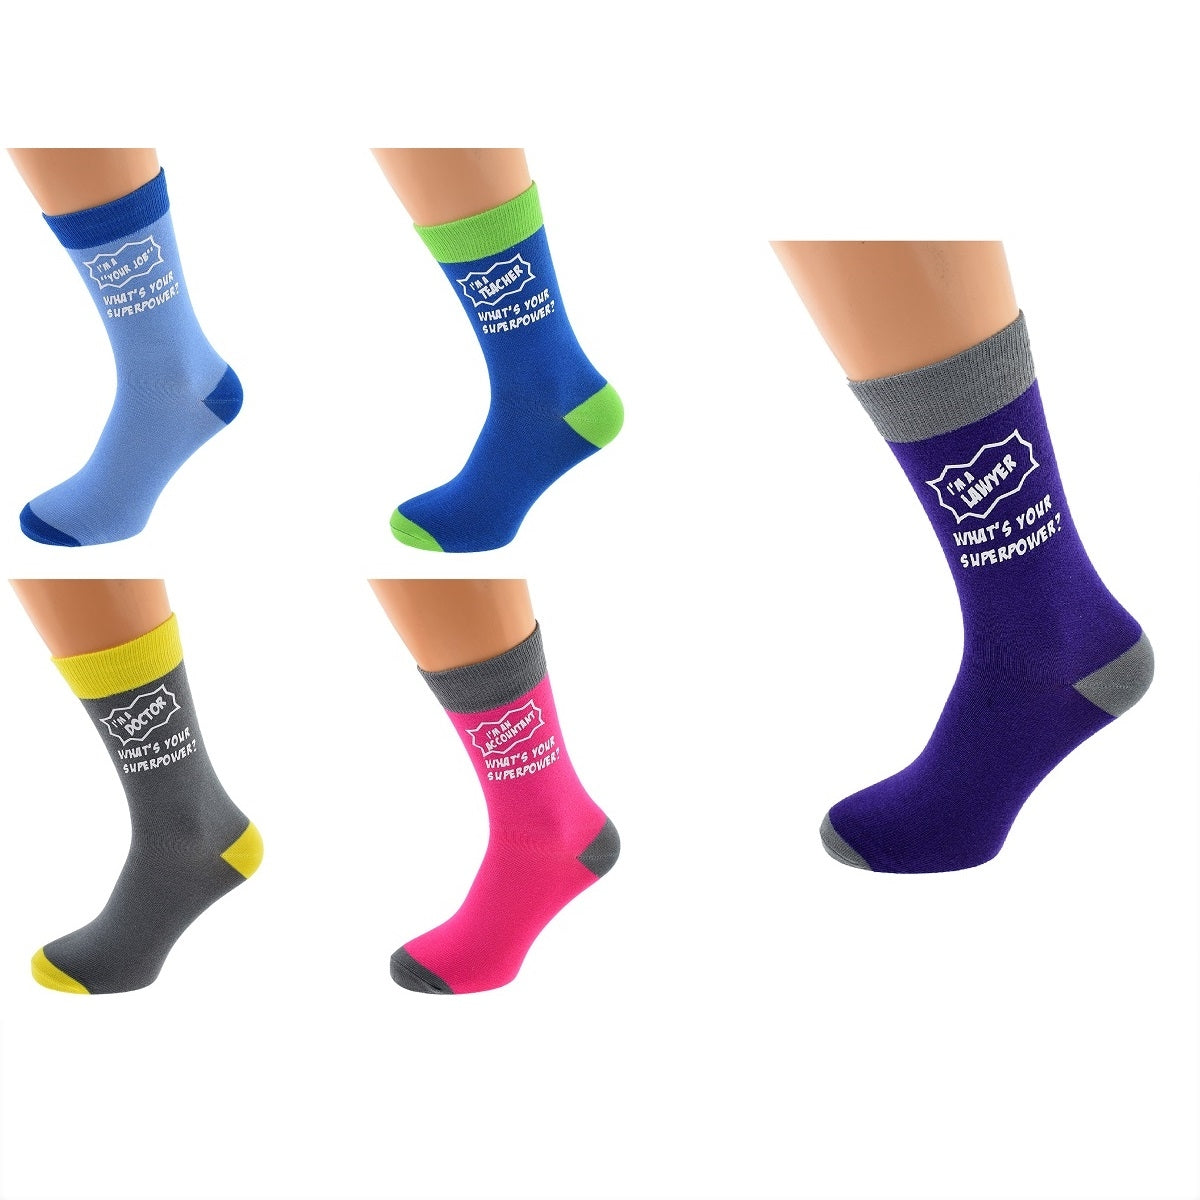 Versatile Two-Tone Unisex Socks with 'Any Job Made/What's Your Super Power?' Design - Personalised for All Professions.